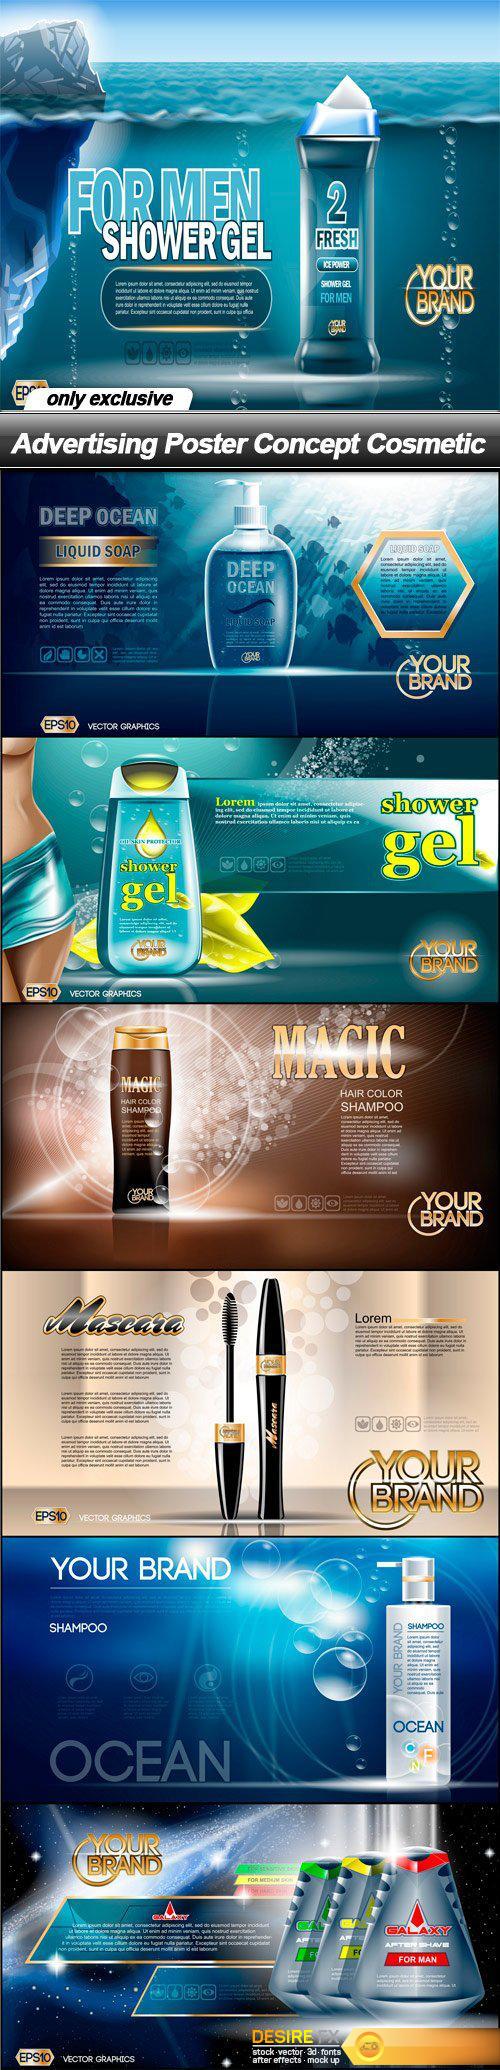 Advertising Poster Concept Cosmetic - 7 EPS